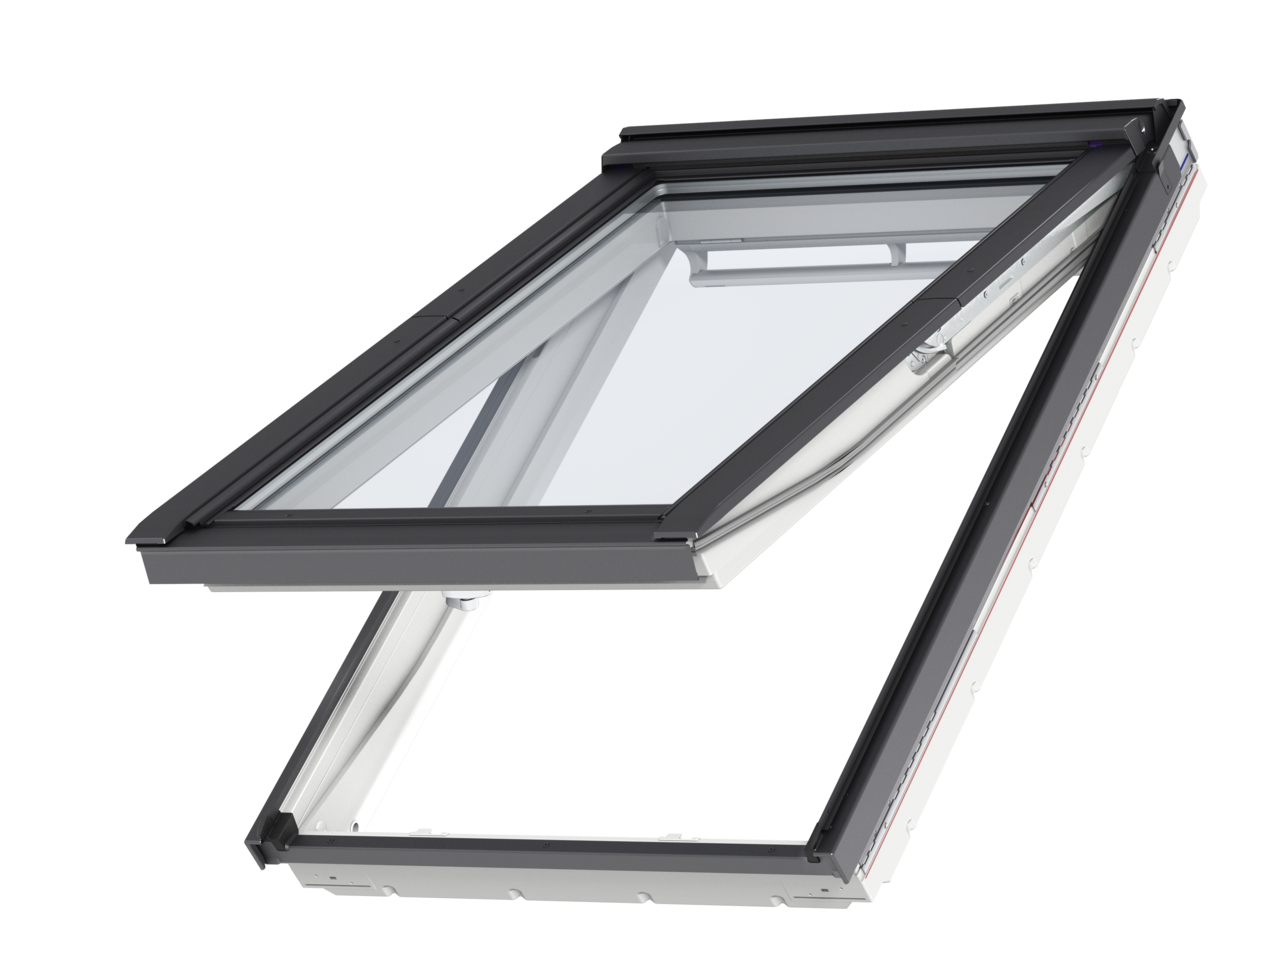 Possession Seaside strategy PVC Pitched Roof Windows - Roof Window Outlet